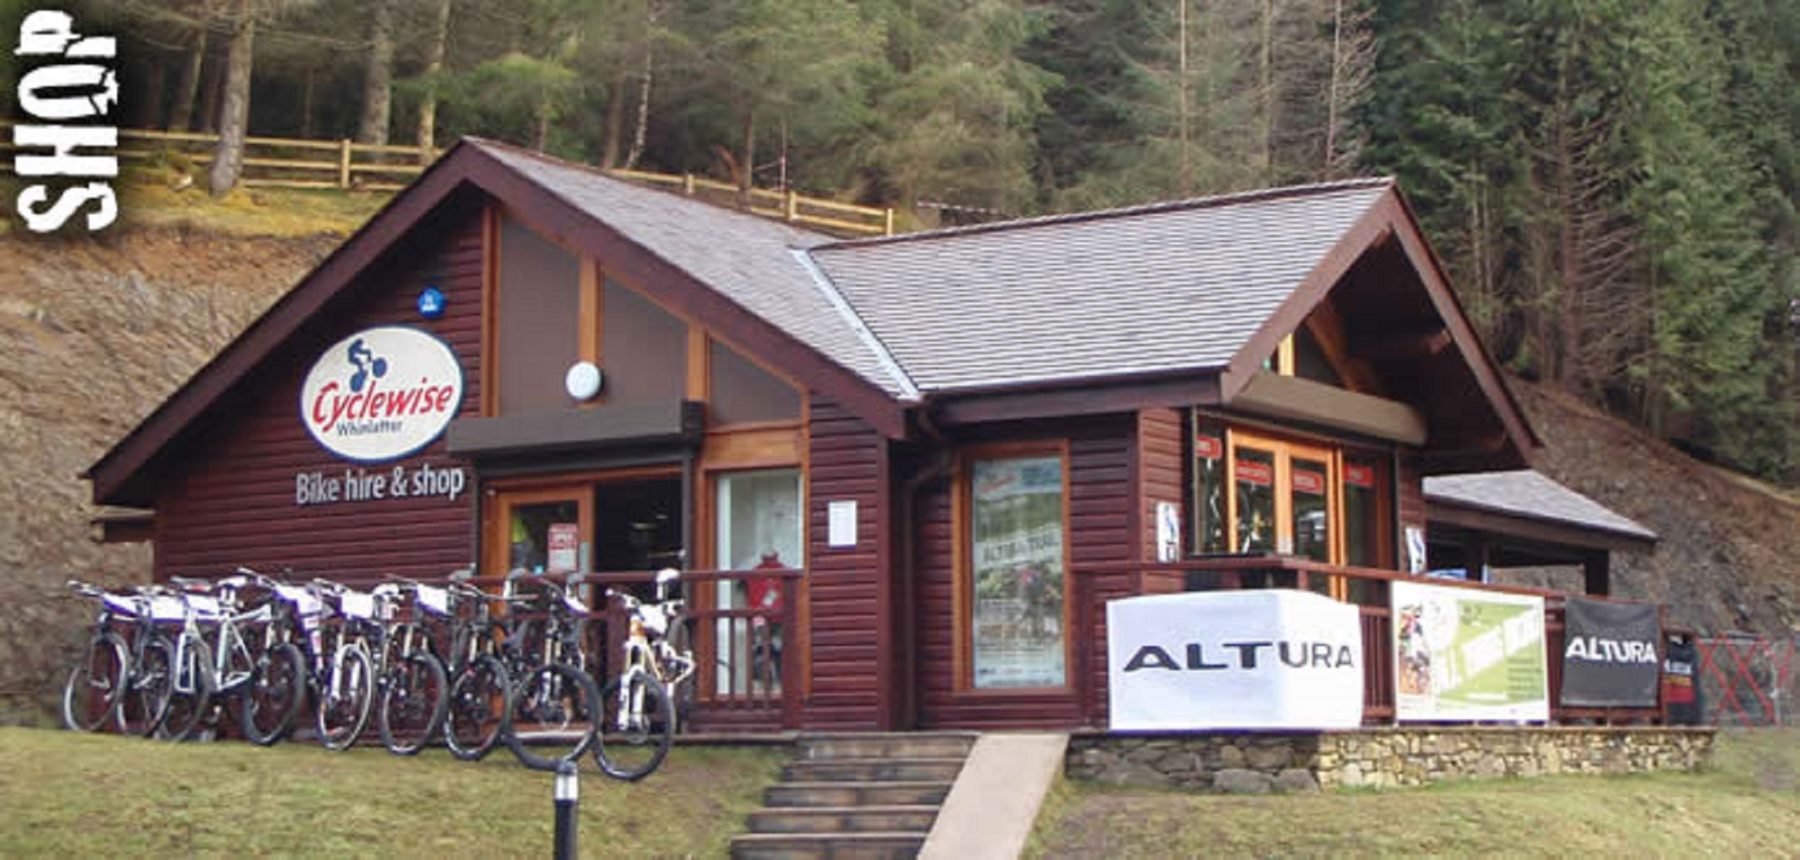 family-activities-cyclewise-at-whinlatter